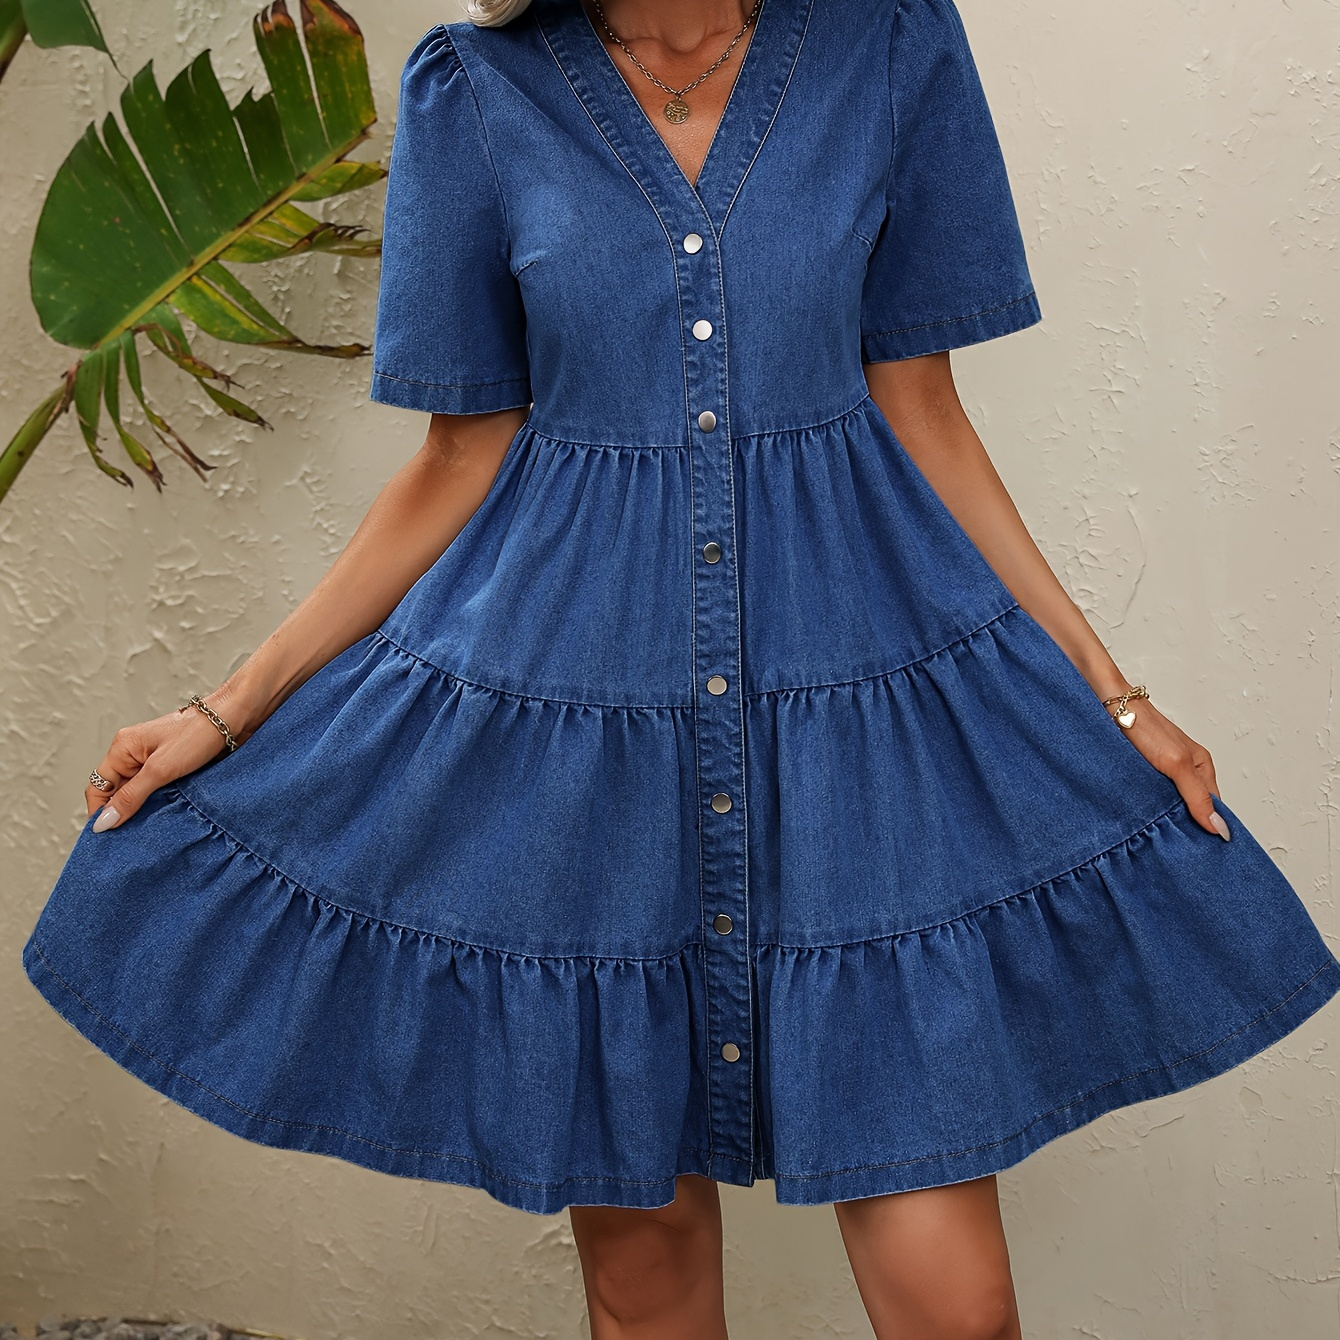 

Women's Elegant V-neck Short Sleeve Denim Tiered Ruffle Dress, Casual Summer A-line Midi Dress With Button Front - Versatile Fashion For Various Occasions